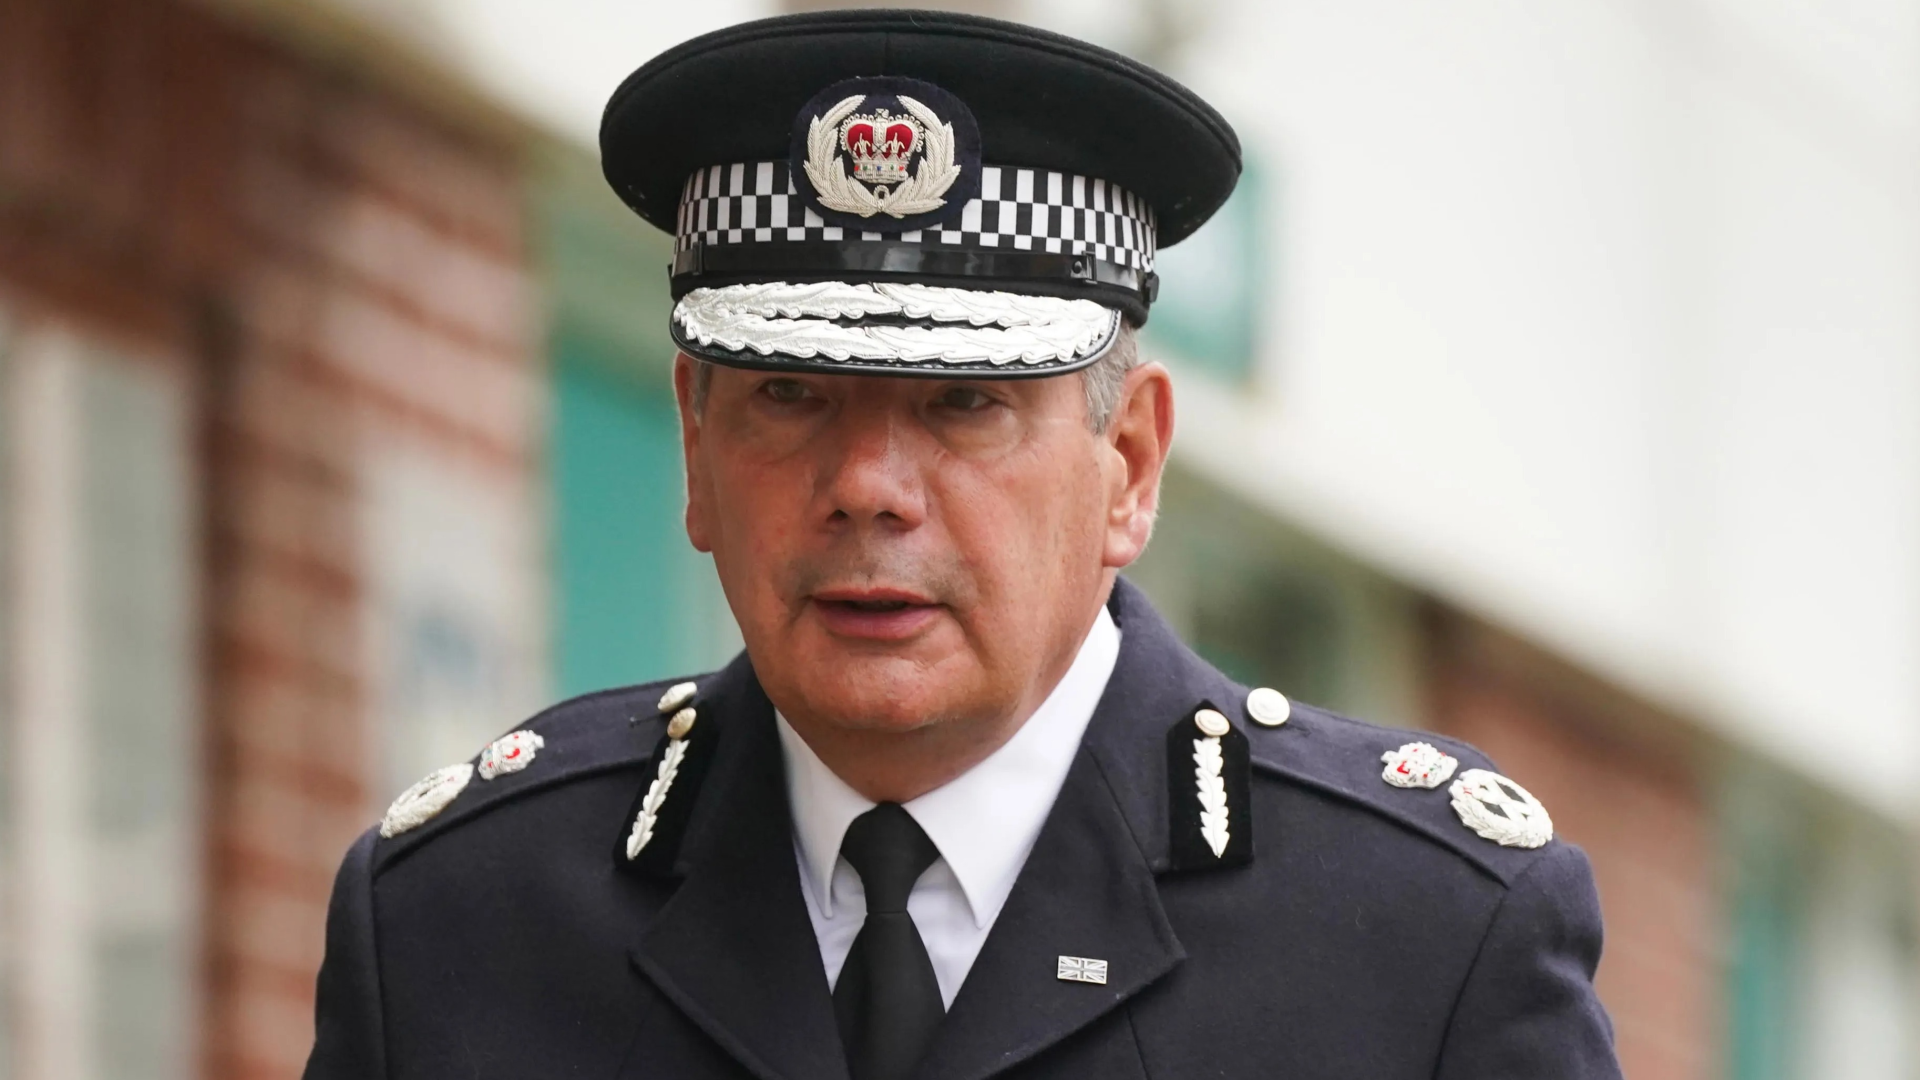 Top cop accused of wearing ‘fake’ Falklands War medal shopped by ex-wife’ over ‘bare-faced lies’...